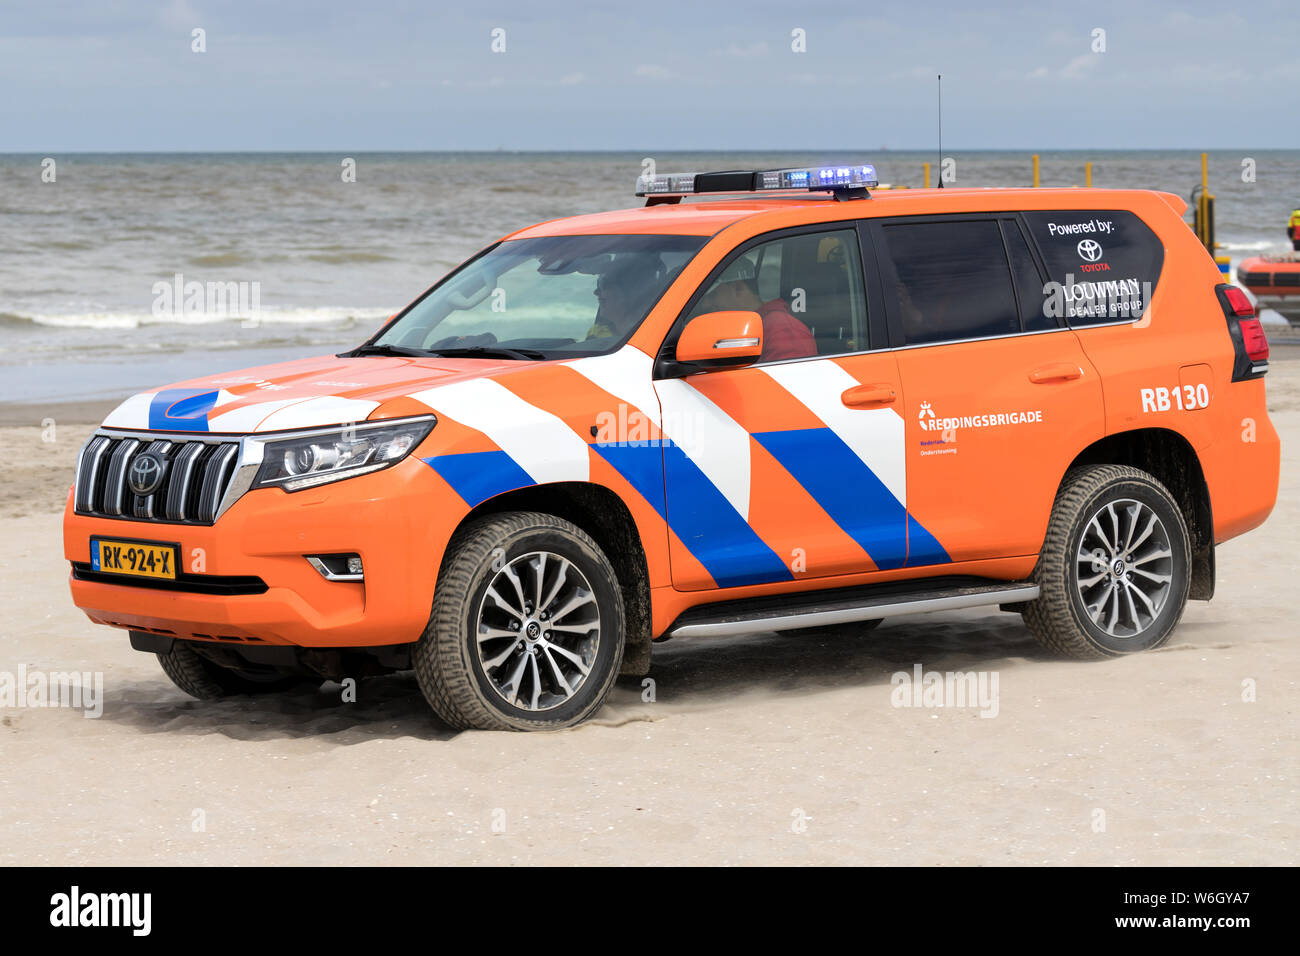 Dutch lifeguard Toyota Land Cruiser with active blue emergency lighting on the beach Stock Photo